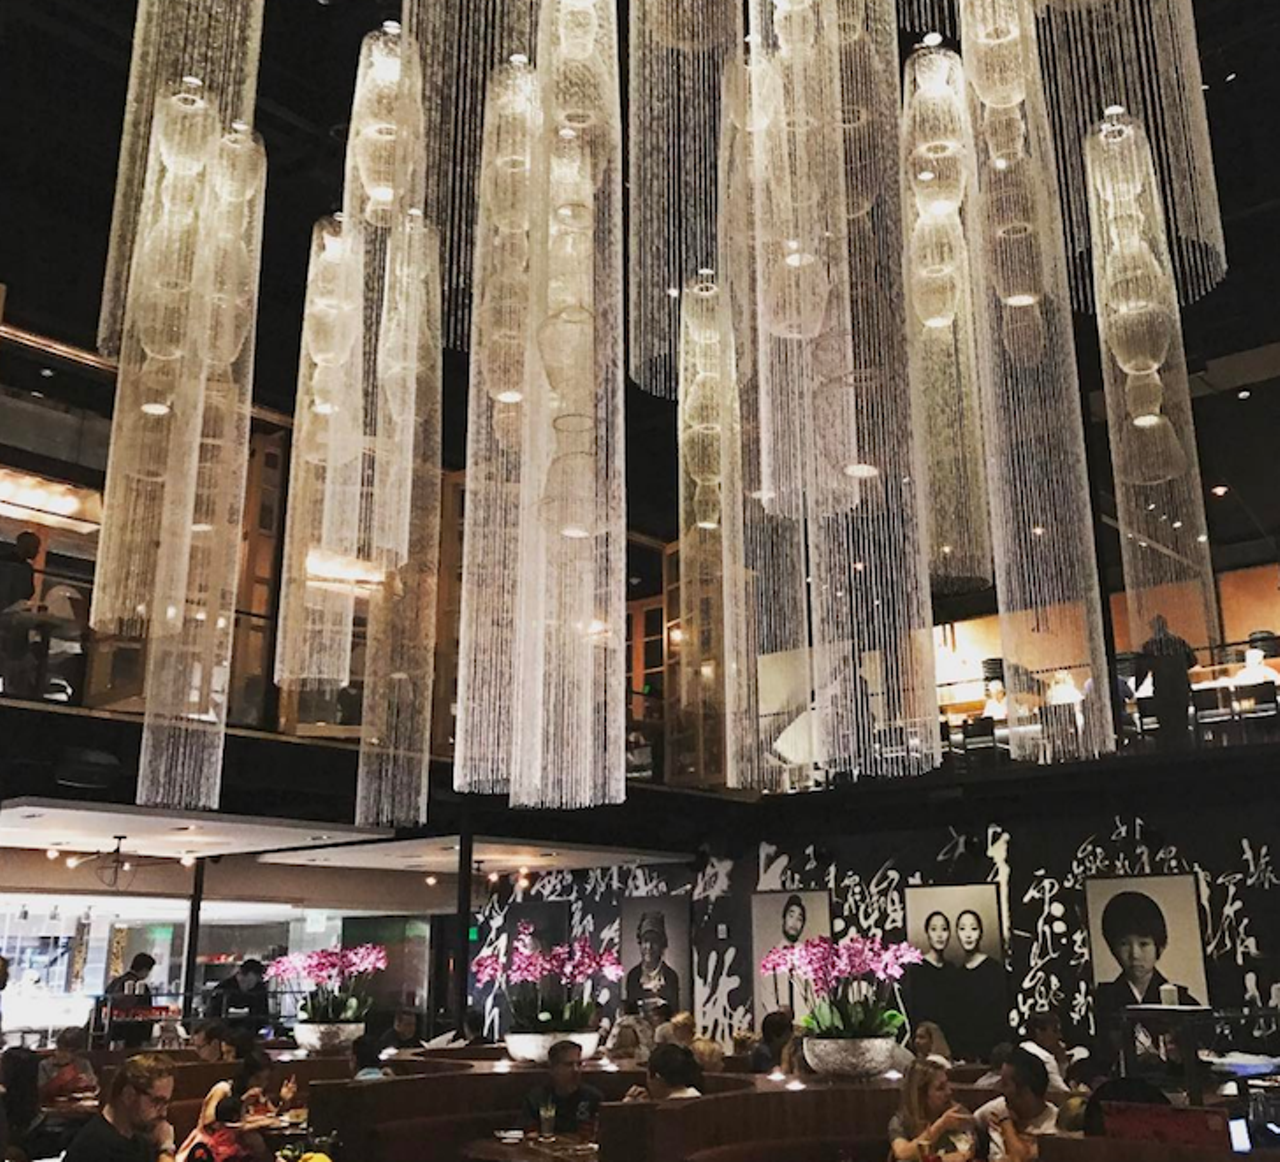 Morimoto Asia
Disney Springs, 1600 E. Buena Vista Blvd. Lake Buena Vista, FL 32830, (407) 939-6686; $$$$
Palatial resto offers pricey but well-executed pan-Asian eats. Rock shrimp tempura, braised black cod, duck ramen and arresting Peking duck wow, and spicy yellowtail rolls and ethereal otoro are wonderful. Pairing meals with potent potables is easy here: plenty of sakes, beers and wine from which to choose. Reservations are recommended, though the second-floor Forbidden Lounge is a draw for the walk-up diner.
Photo via valda0062/Instagram